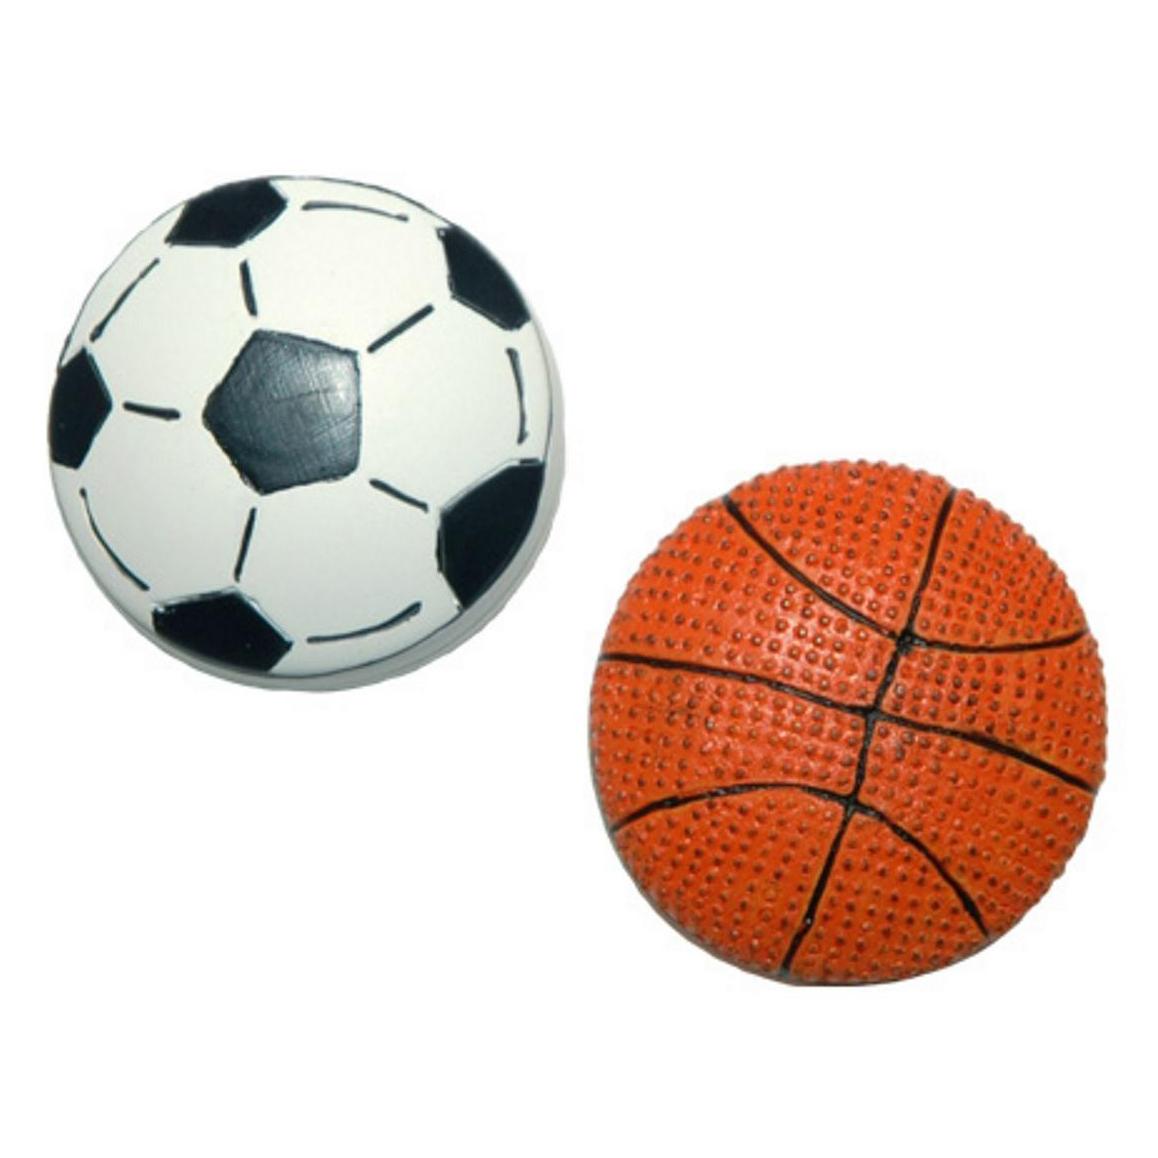 Pictures Of Basketballs And Soccer Balls